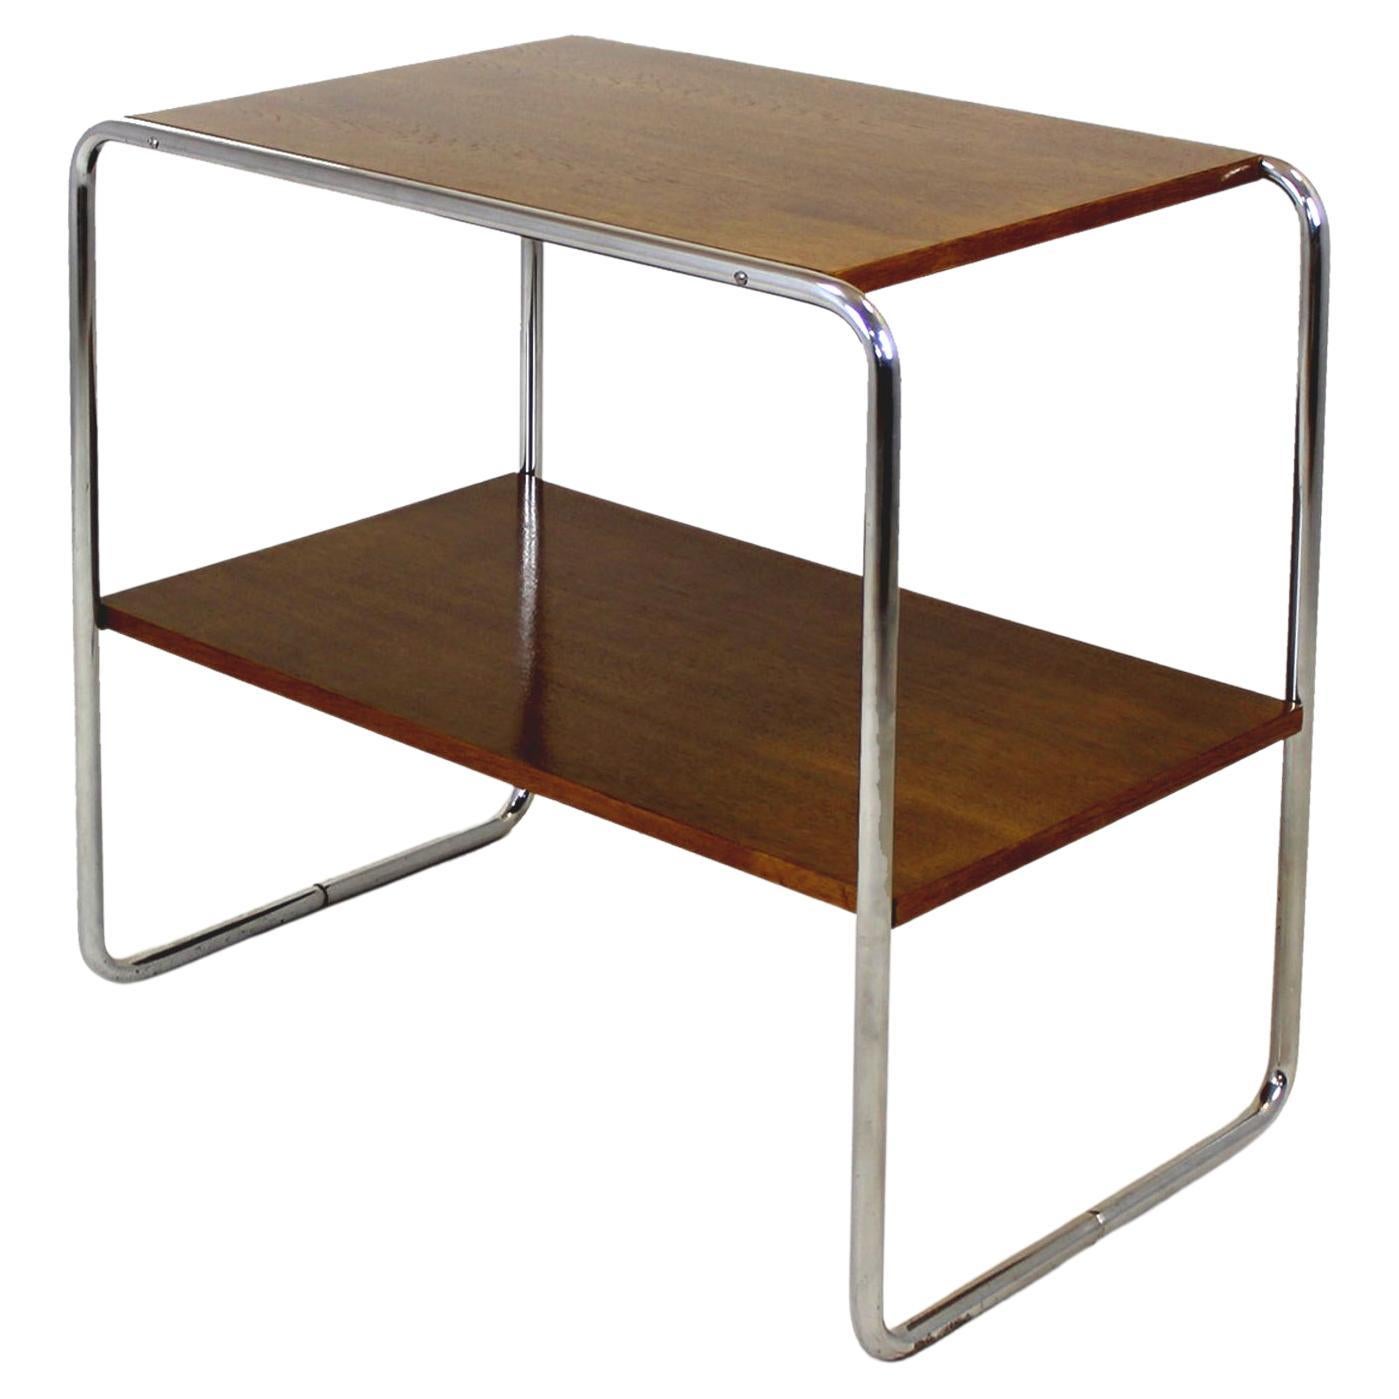 Refinished B12 Side Table by Marcel Breuer, 1940s For Sale